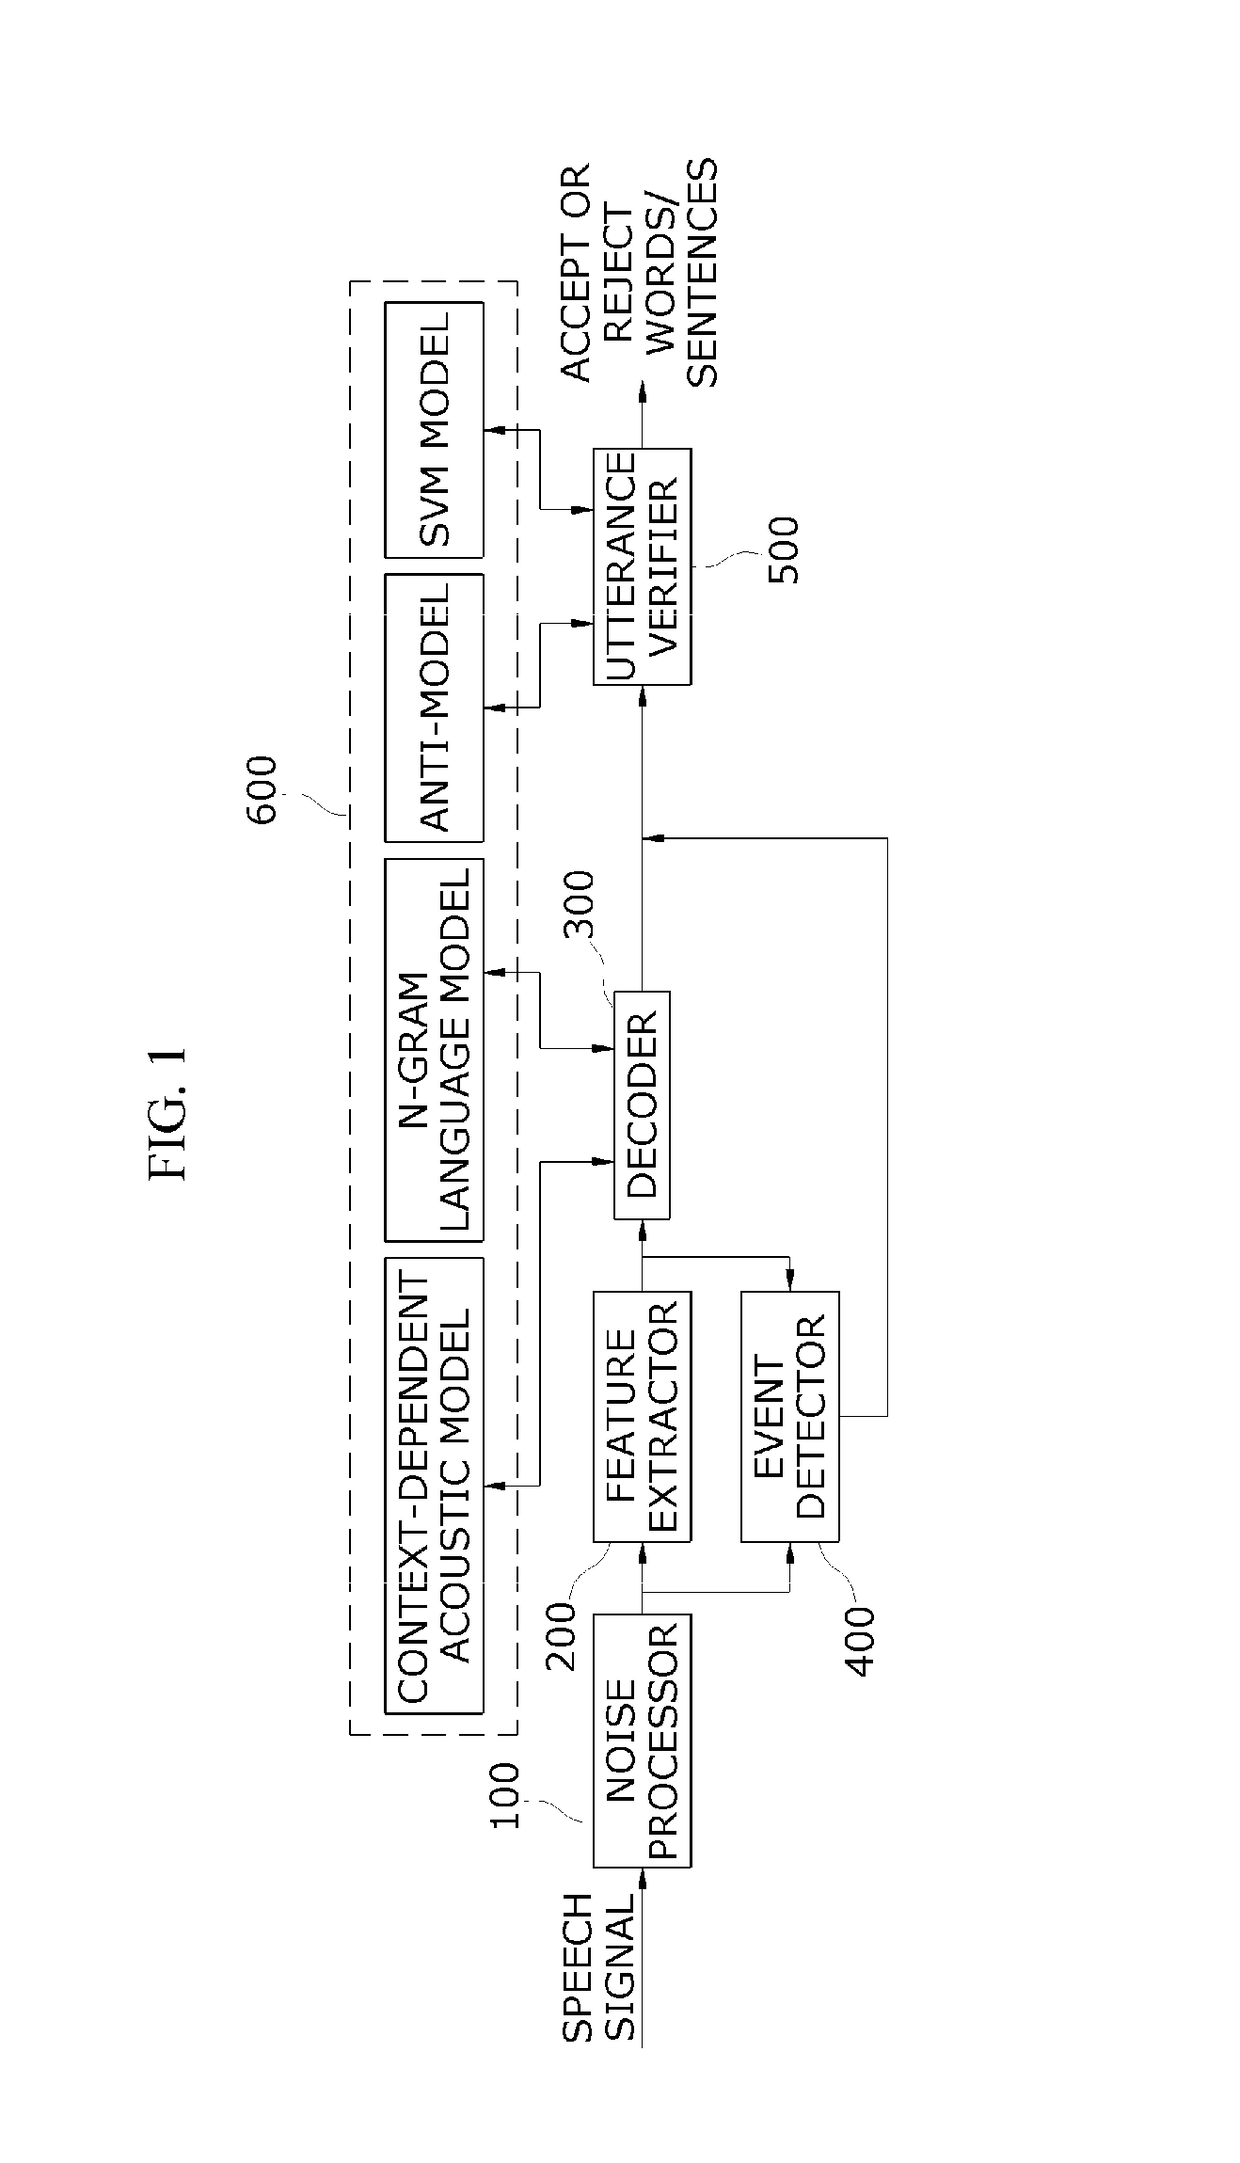 Apparatus and method for verifying utterance in speech recognition system